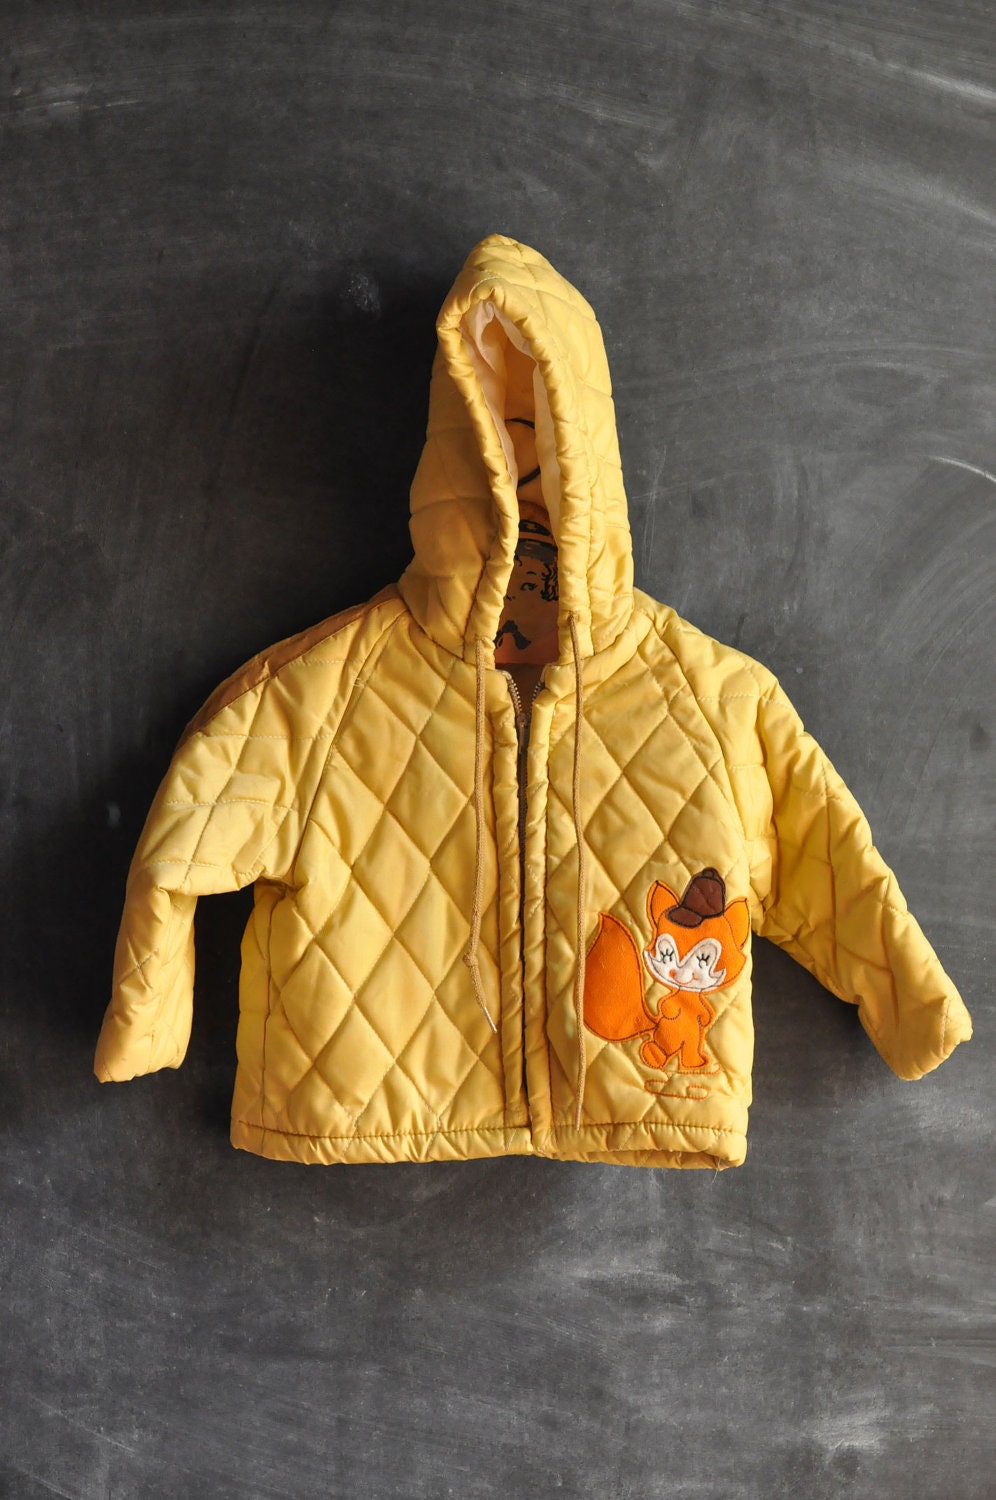 Vintage 1970s Quilted Yellow Fox Winter Coat size 2 Toddler - drowsySwords